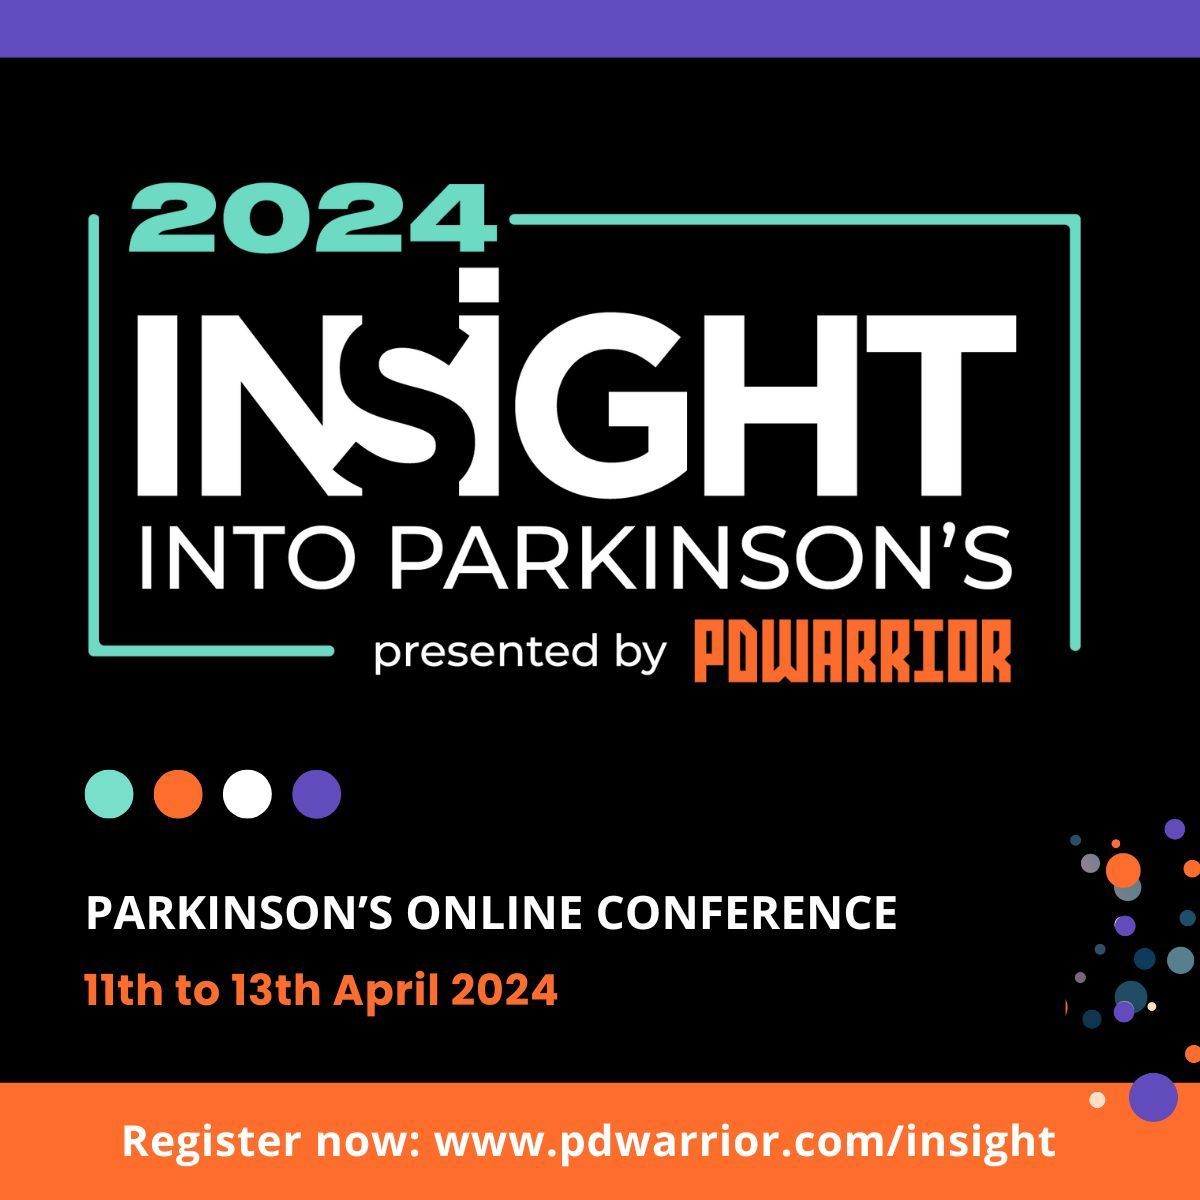 Register for PD Warrior's annual conference, Insight into Parkinson’s. Hear from specialists (including our very own Dr Simon Stott) at this free online event for people living with Parkinson’s, Parkinson’s carers, and Parkinson’s researchers: buff.ly/4a79ZeW